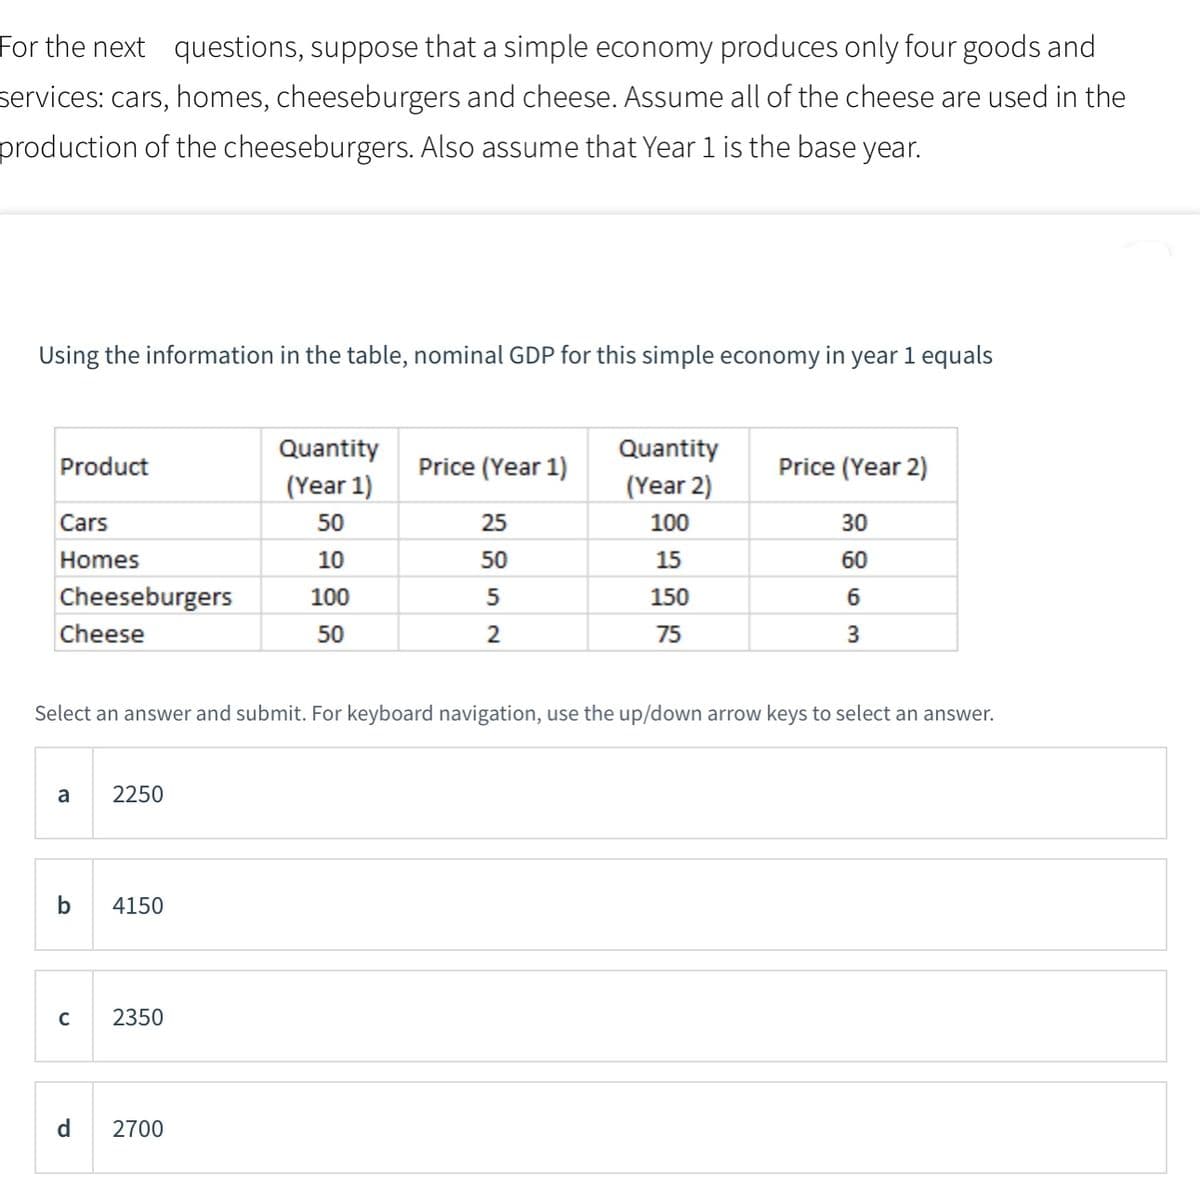 For the next questions, suppose that a simple economy produces only four goods and
services: cars, homes, cheeseburgers and cheese. Assume all of the cheese are used in the
production of the cheeseburgers. Also assume that Year1 is the base year.
Using the information in the table, nominal GDP for this simple economy in year 1 equals
Quantity
Quantity
Product
Price (Year 1)
Price (Year 2)
(Year 1)
(Year 2)
Cars
50
25
100
30
Homes
10
50
15
60
Cheeseburgers
100
150
6
Cheese
50
2
75
3
Select an answer and submit. For keyboard navigation, use the up/down arrow keys to select an answer.
a
2250
b
4150
2350
d
2700
